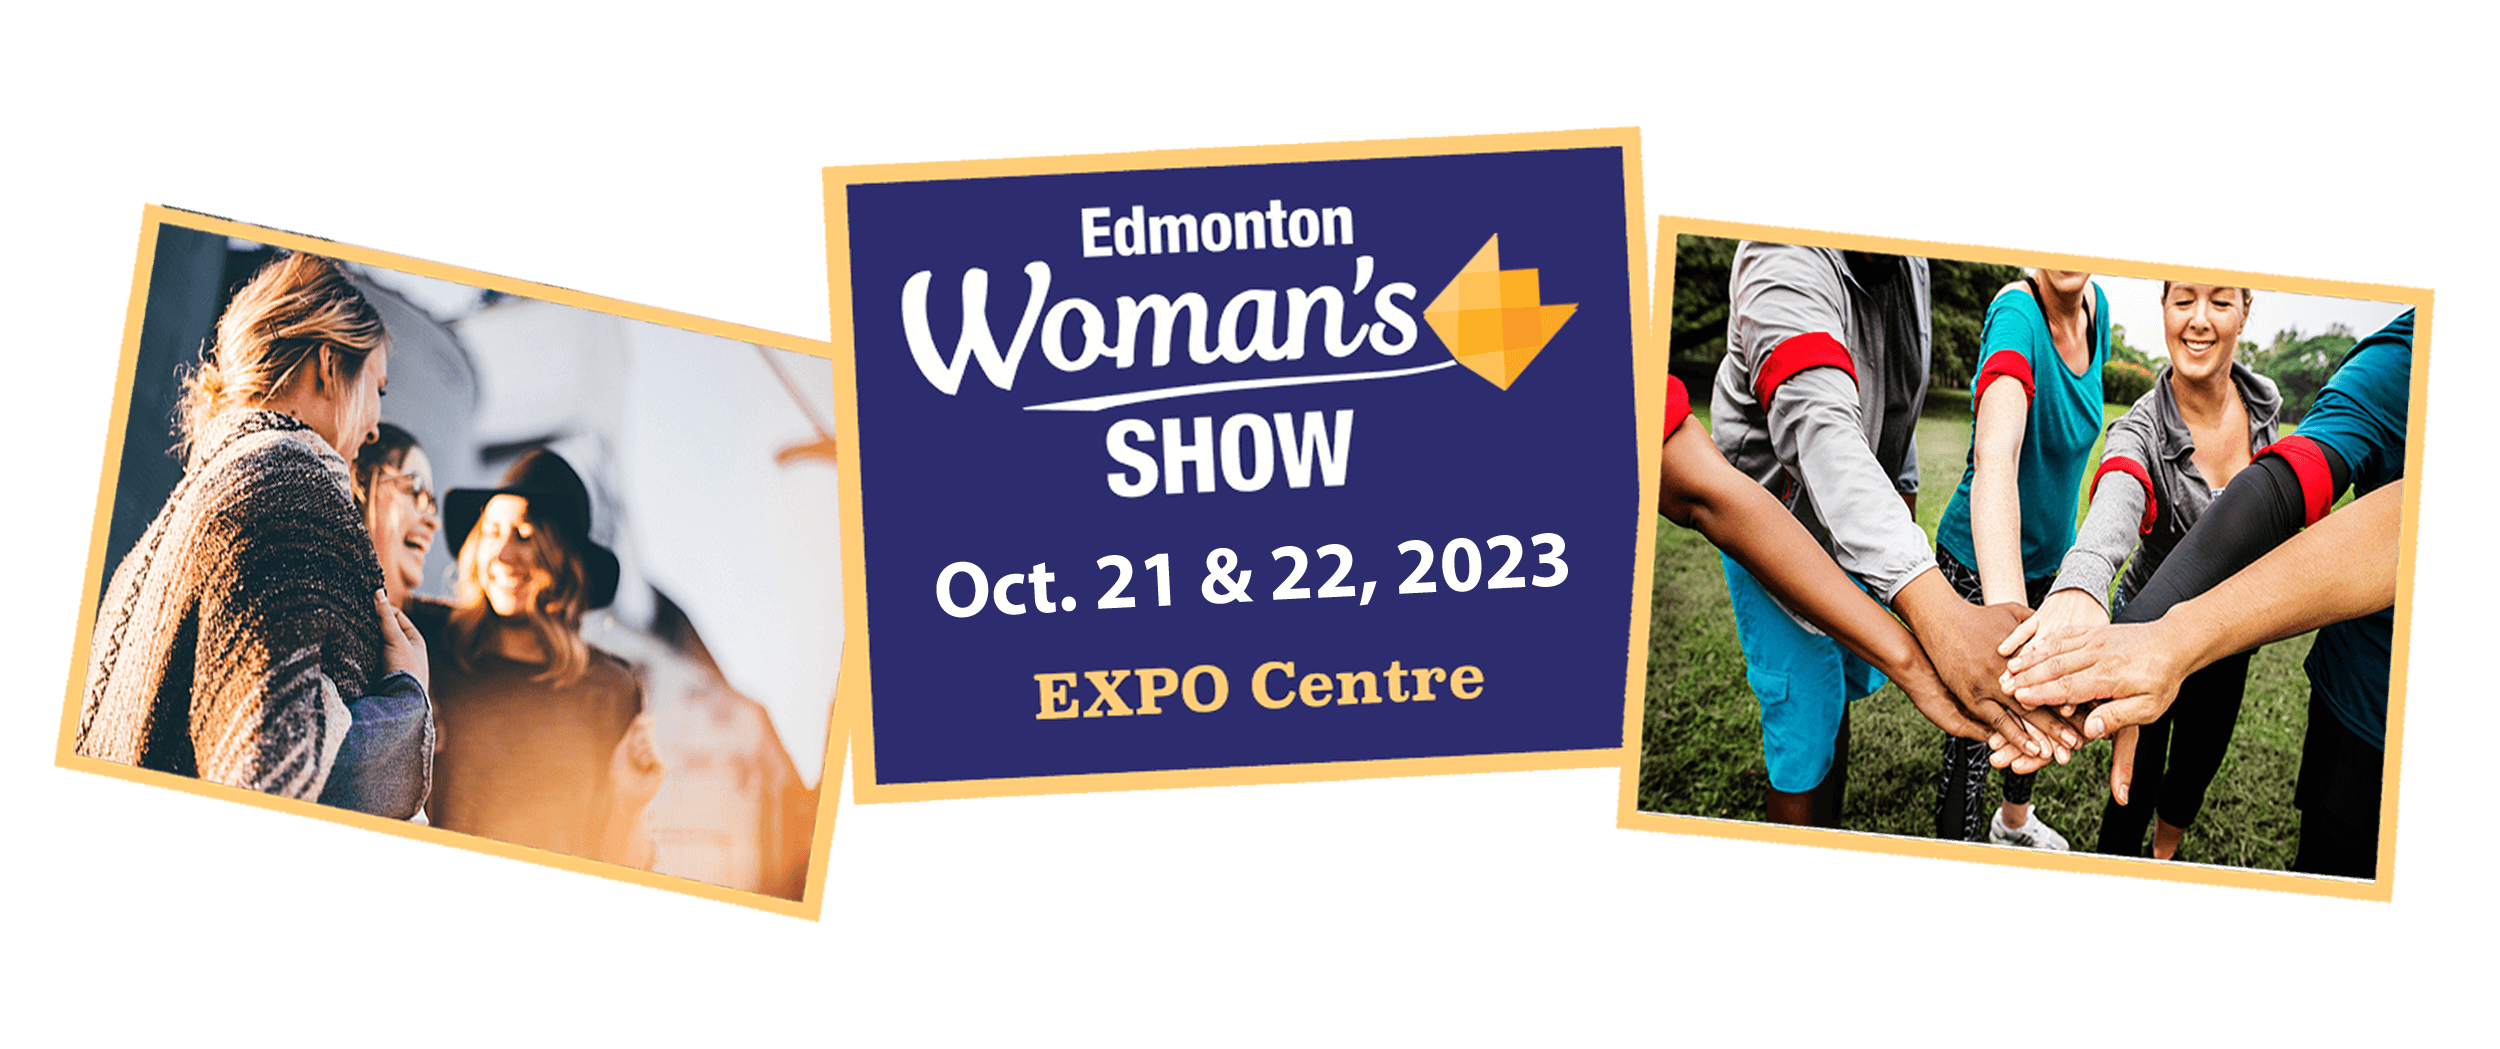 The Edmonton Woman's Show... Who is in your sisterhood?